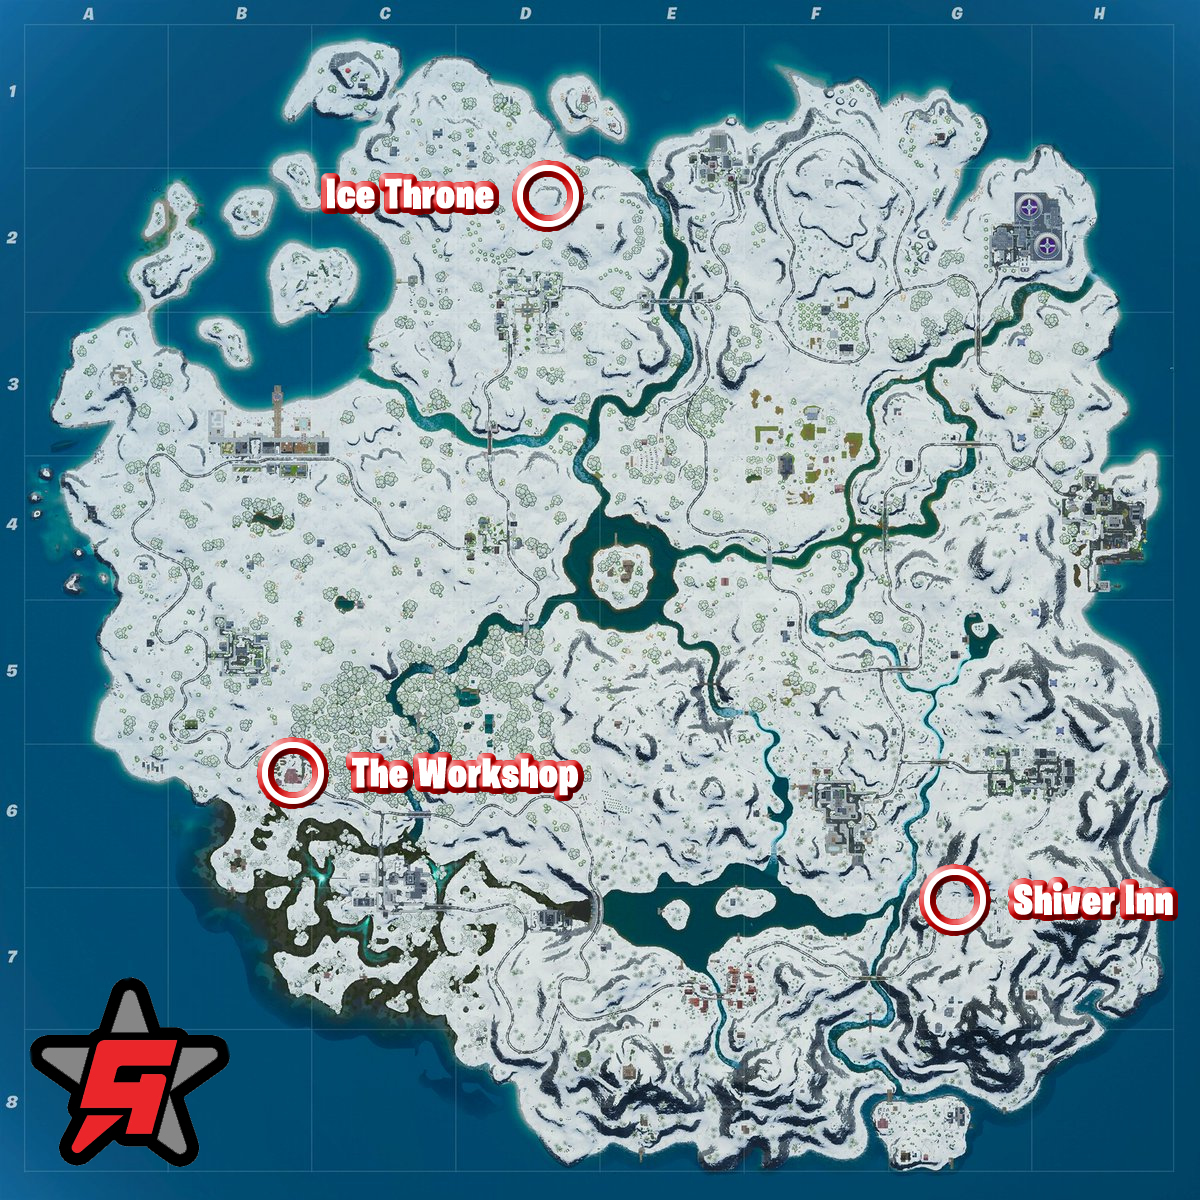 Fortnite Shiver Inn location map search ammo boxes